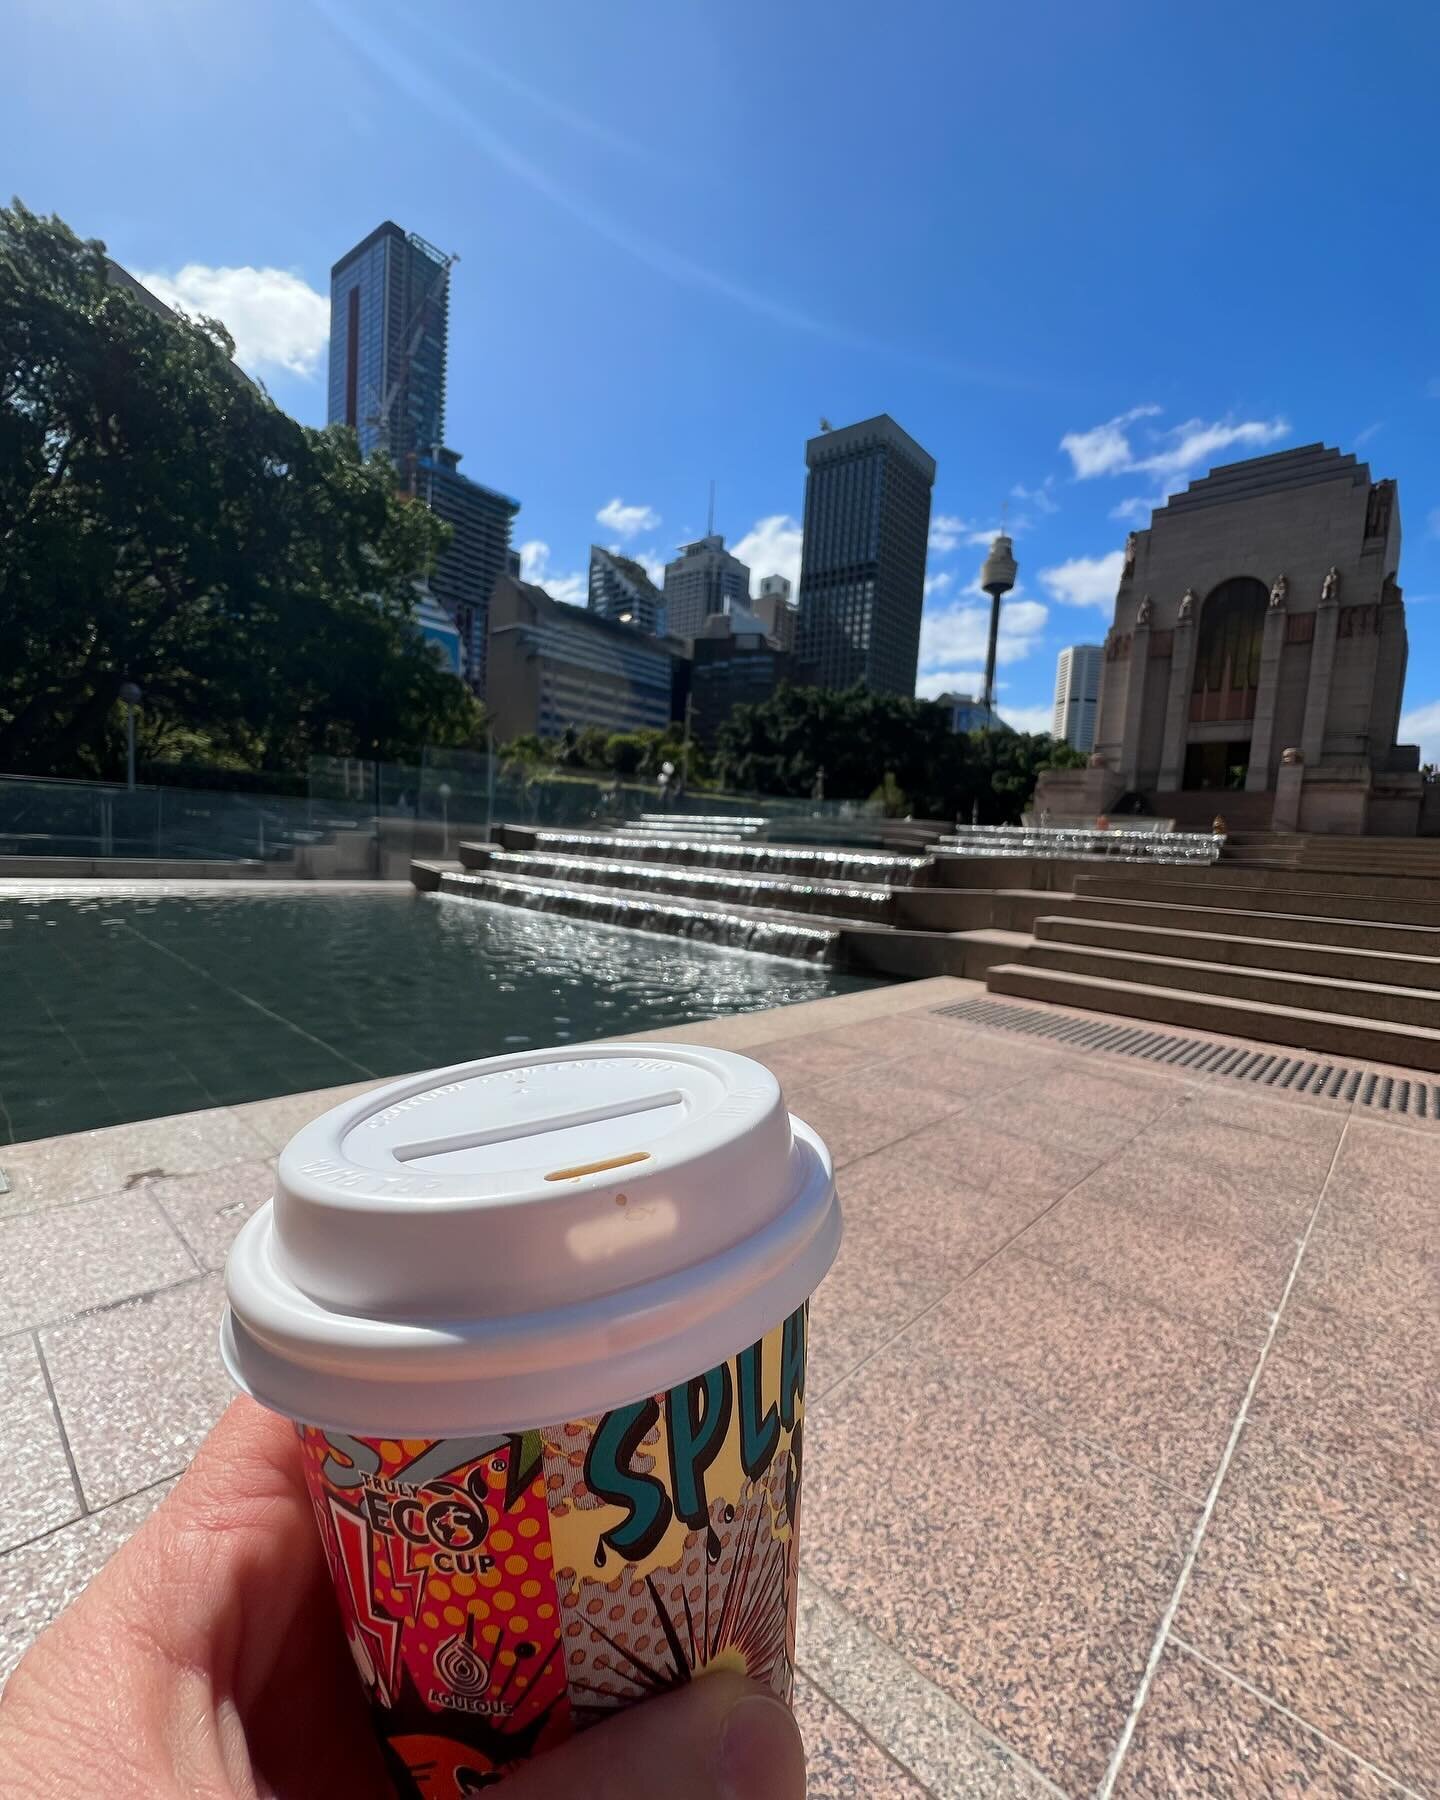 Projects take us to some great places 😎

Australia probably the best coffee in the world - disagree? Tell us otherwise!!